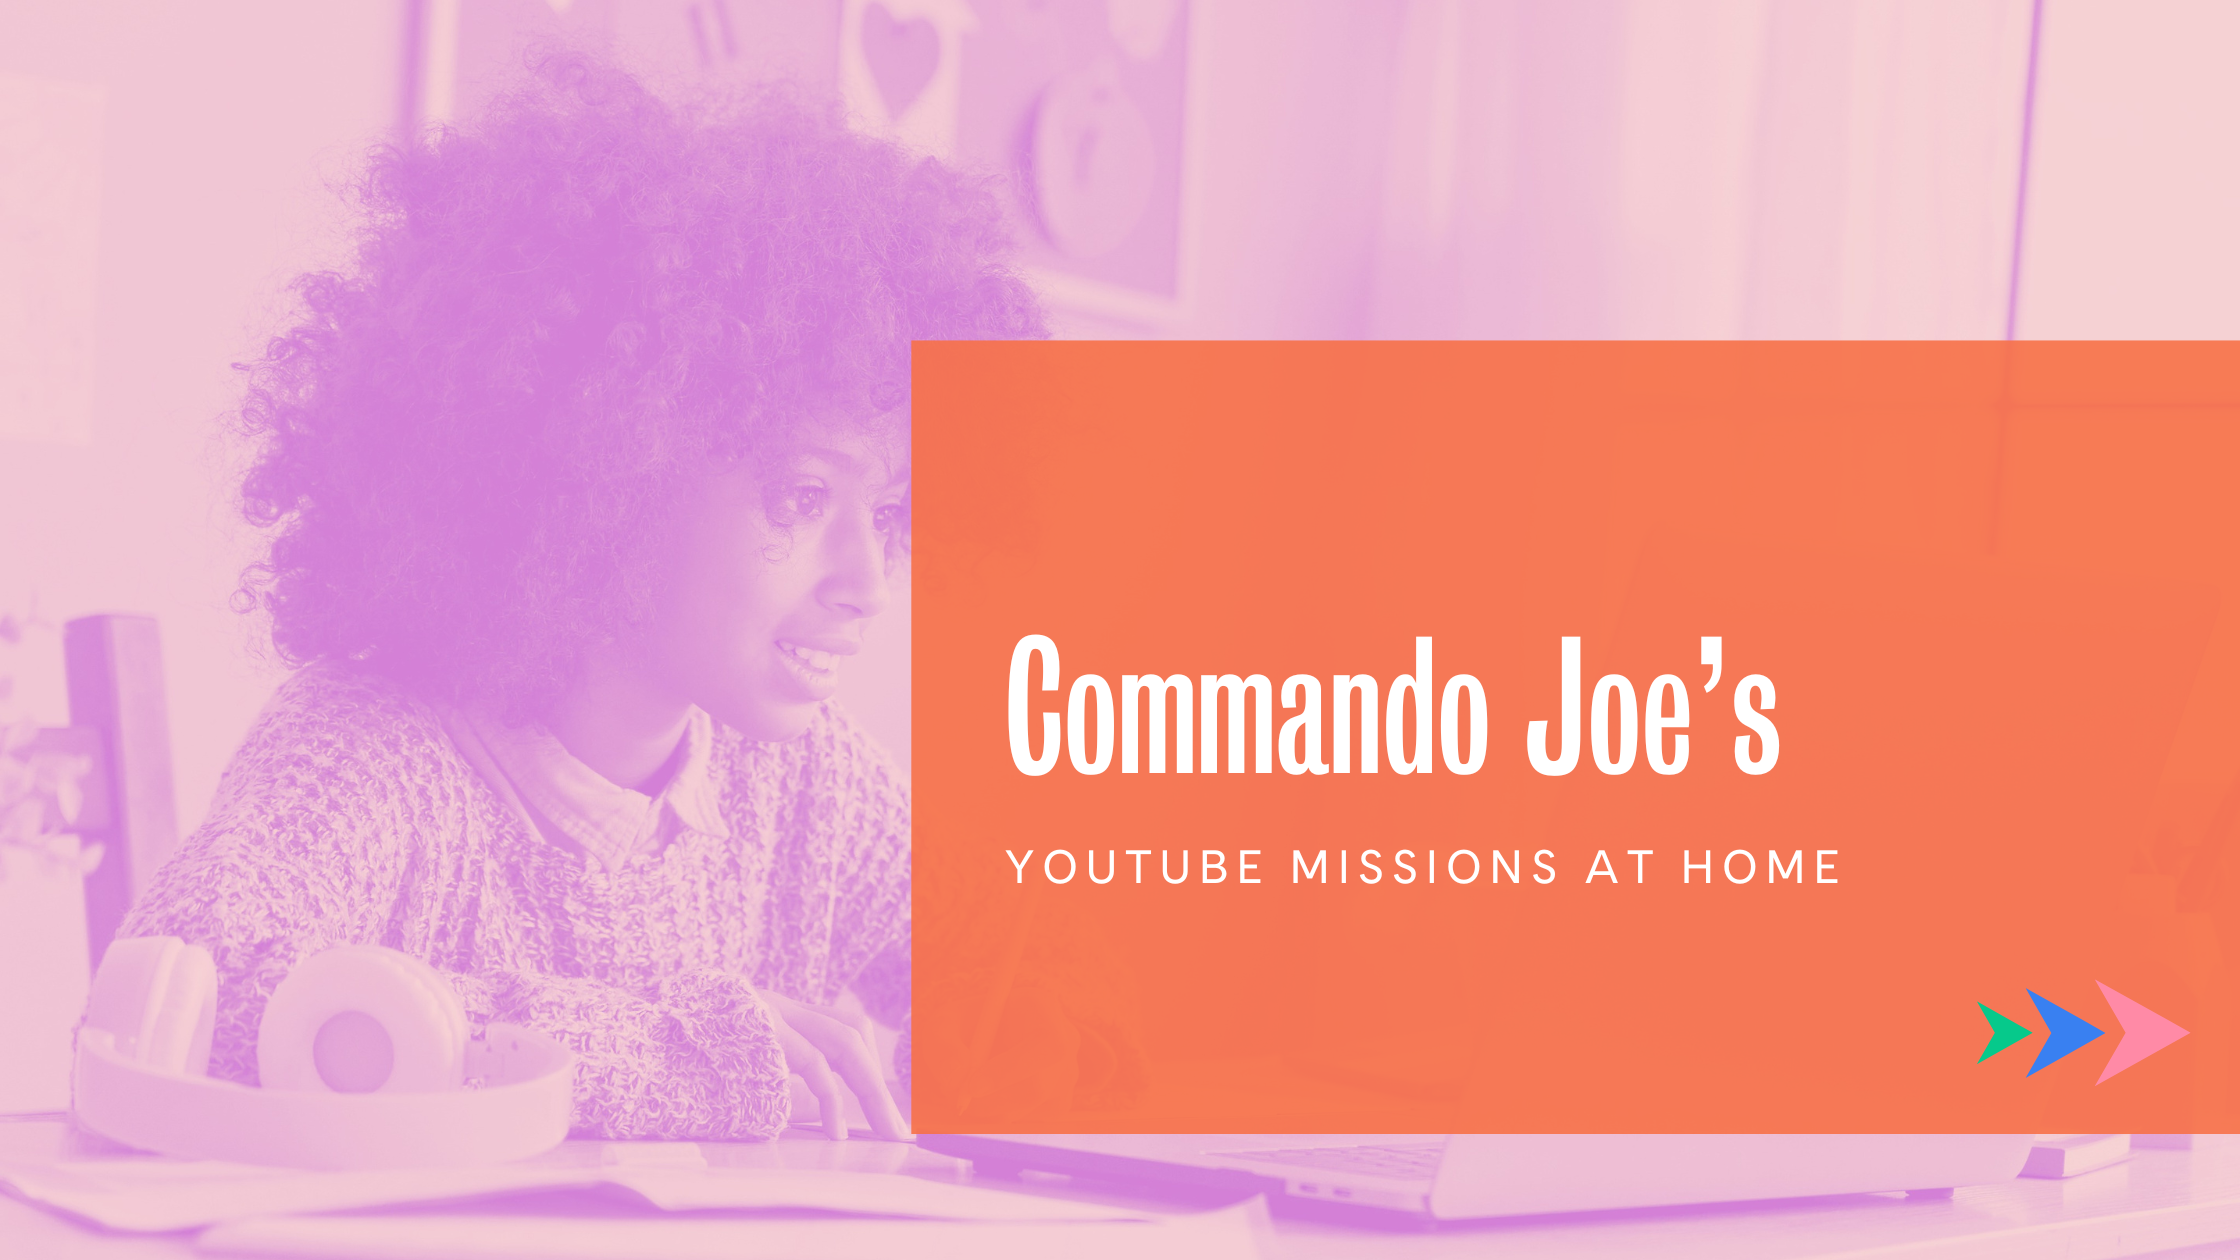 Commando Joe’s launches YouTube Missions from Home!